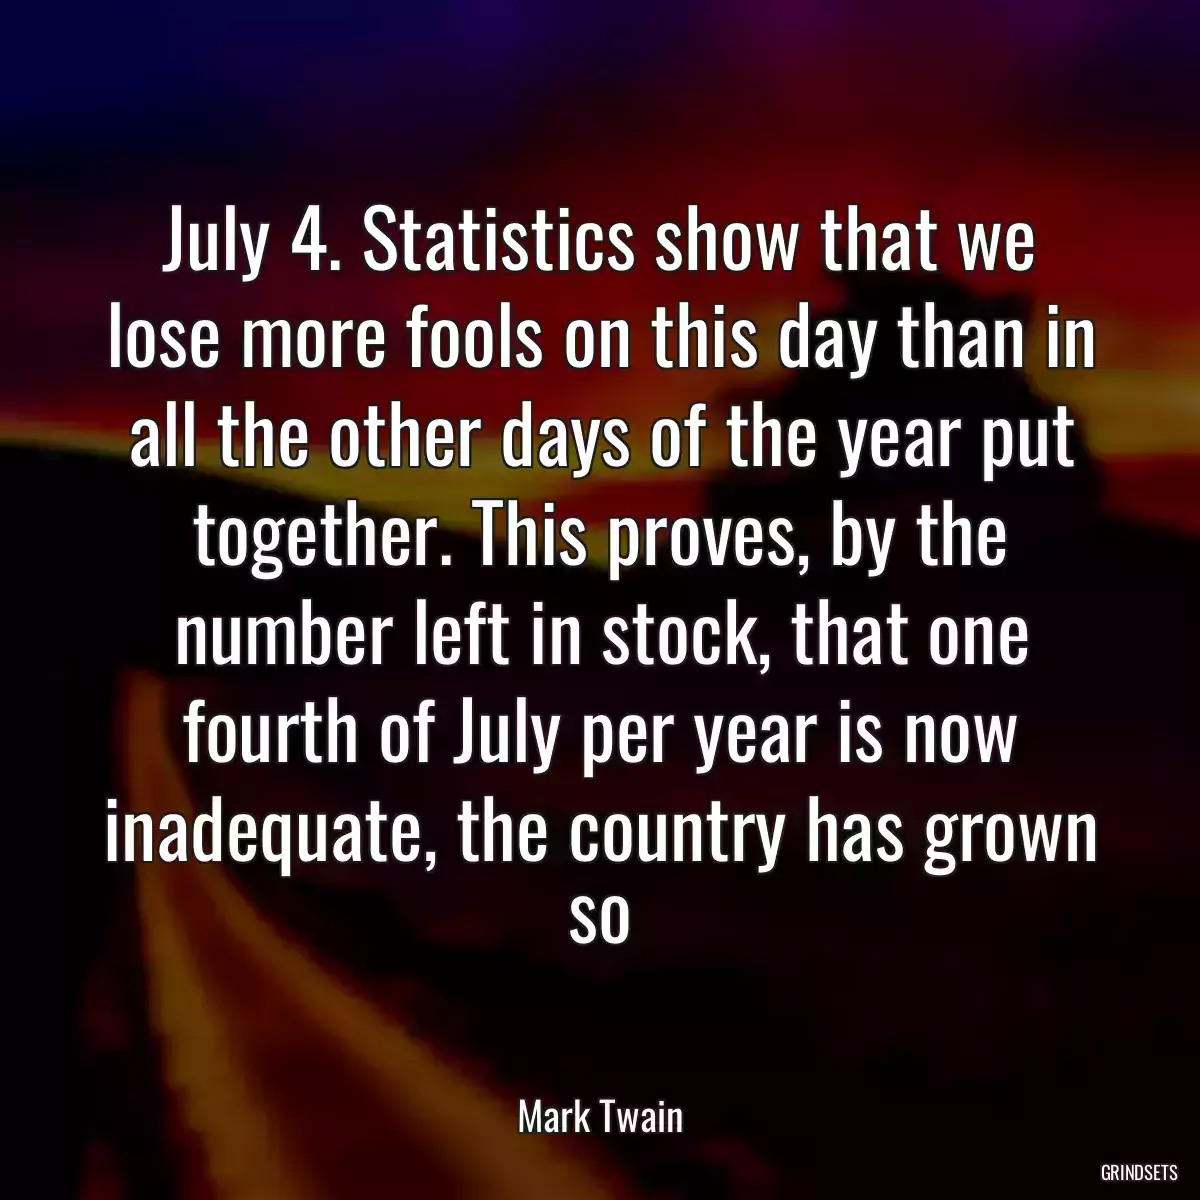 July 4. Statistics show that we lose more fools on this day than in all the other days of the year put together. This proves, by the number left in stock, that one fourth of July per year is now inadequate, the country has grown so